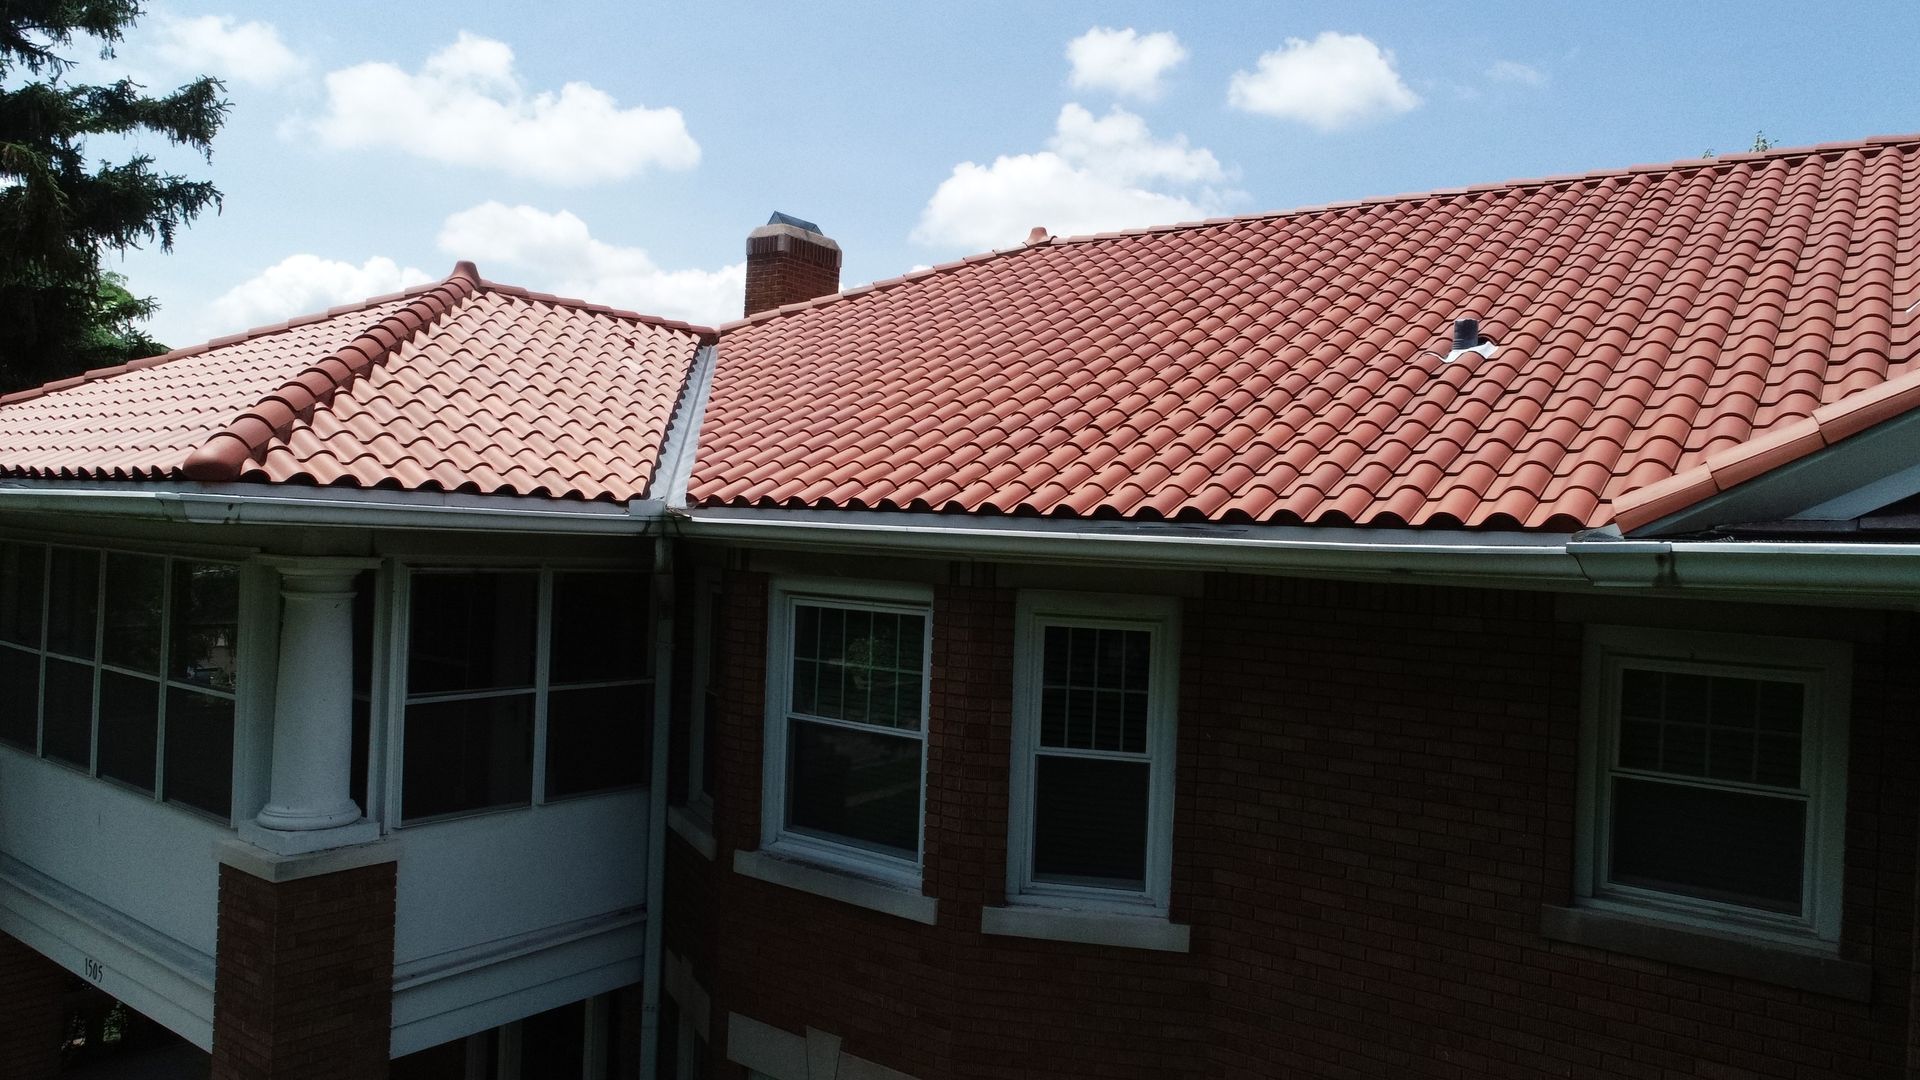 Elegant residential property showcasing a charming clay tile roof installed by Kreiling Roofing